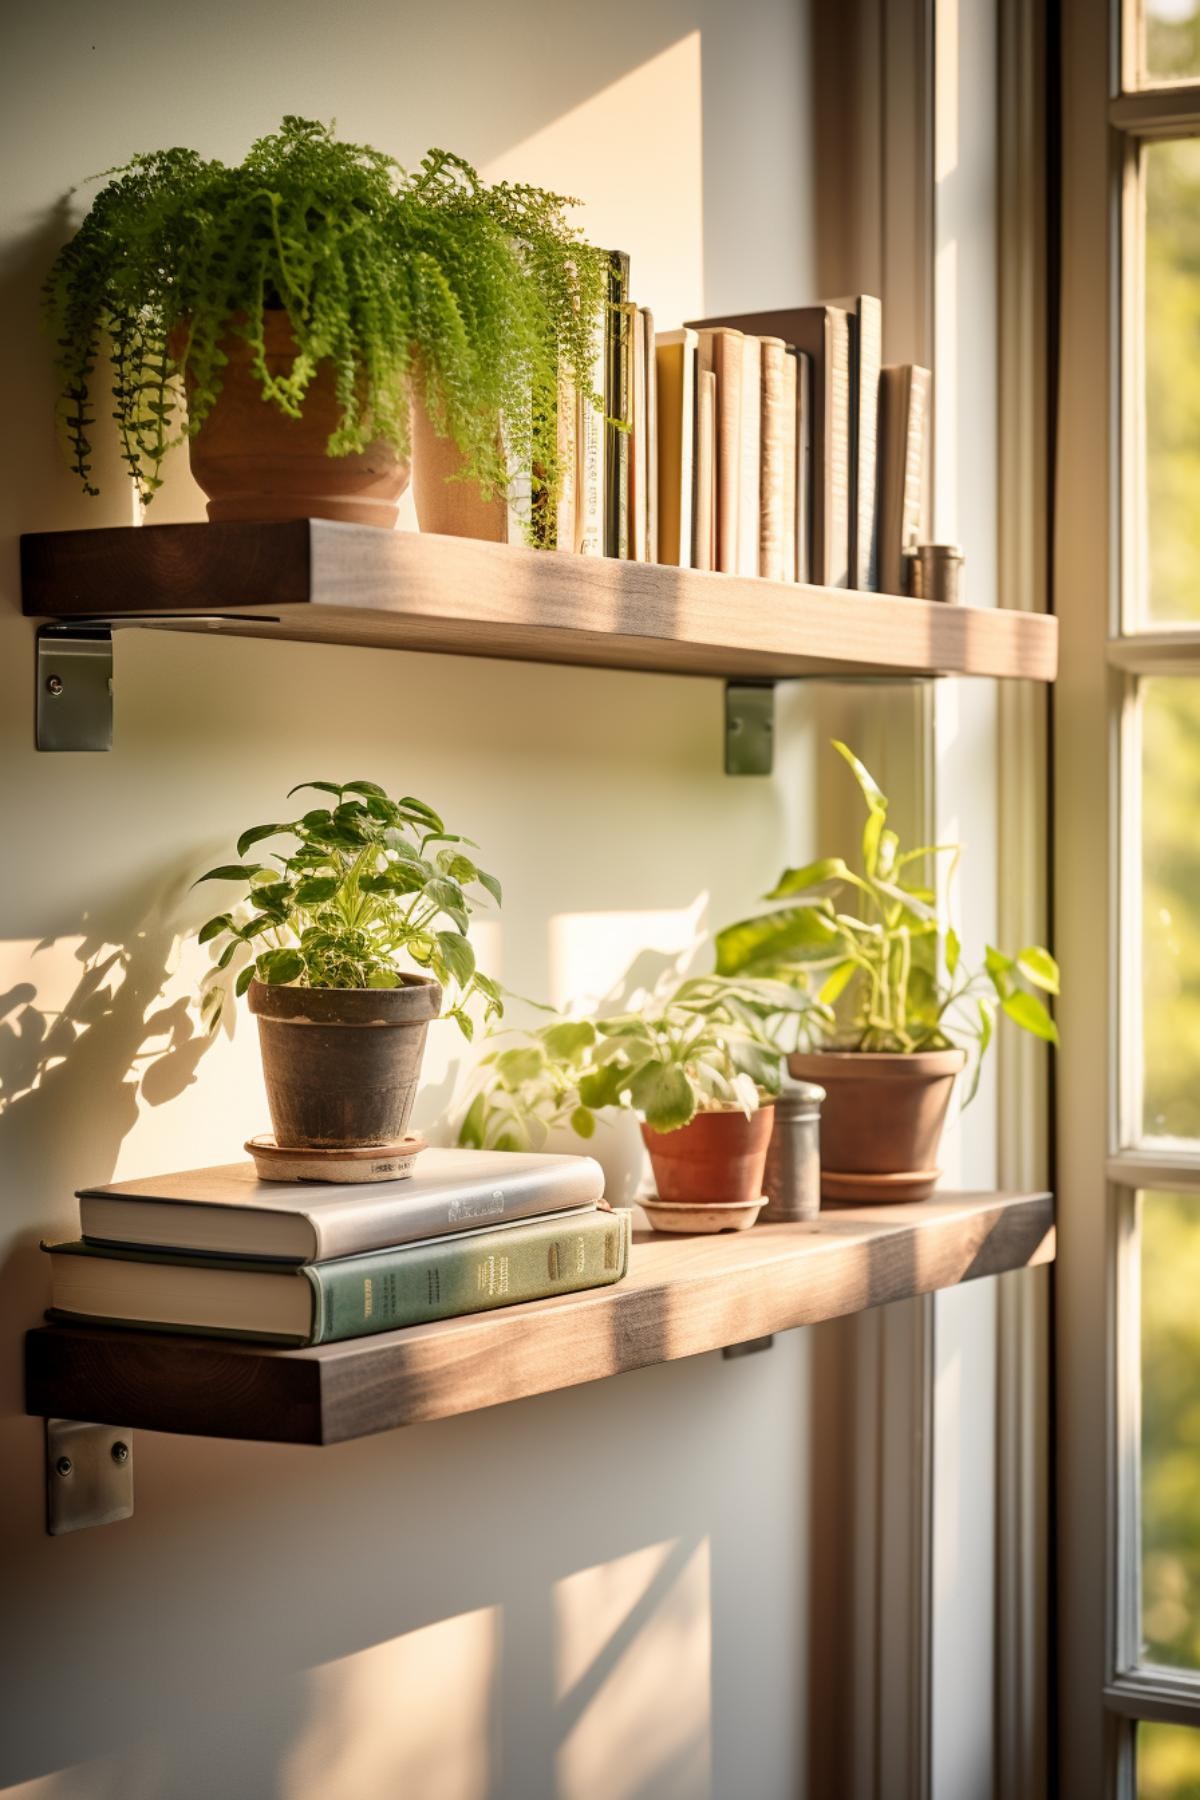 Country-Style Shelf